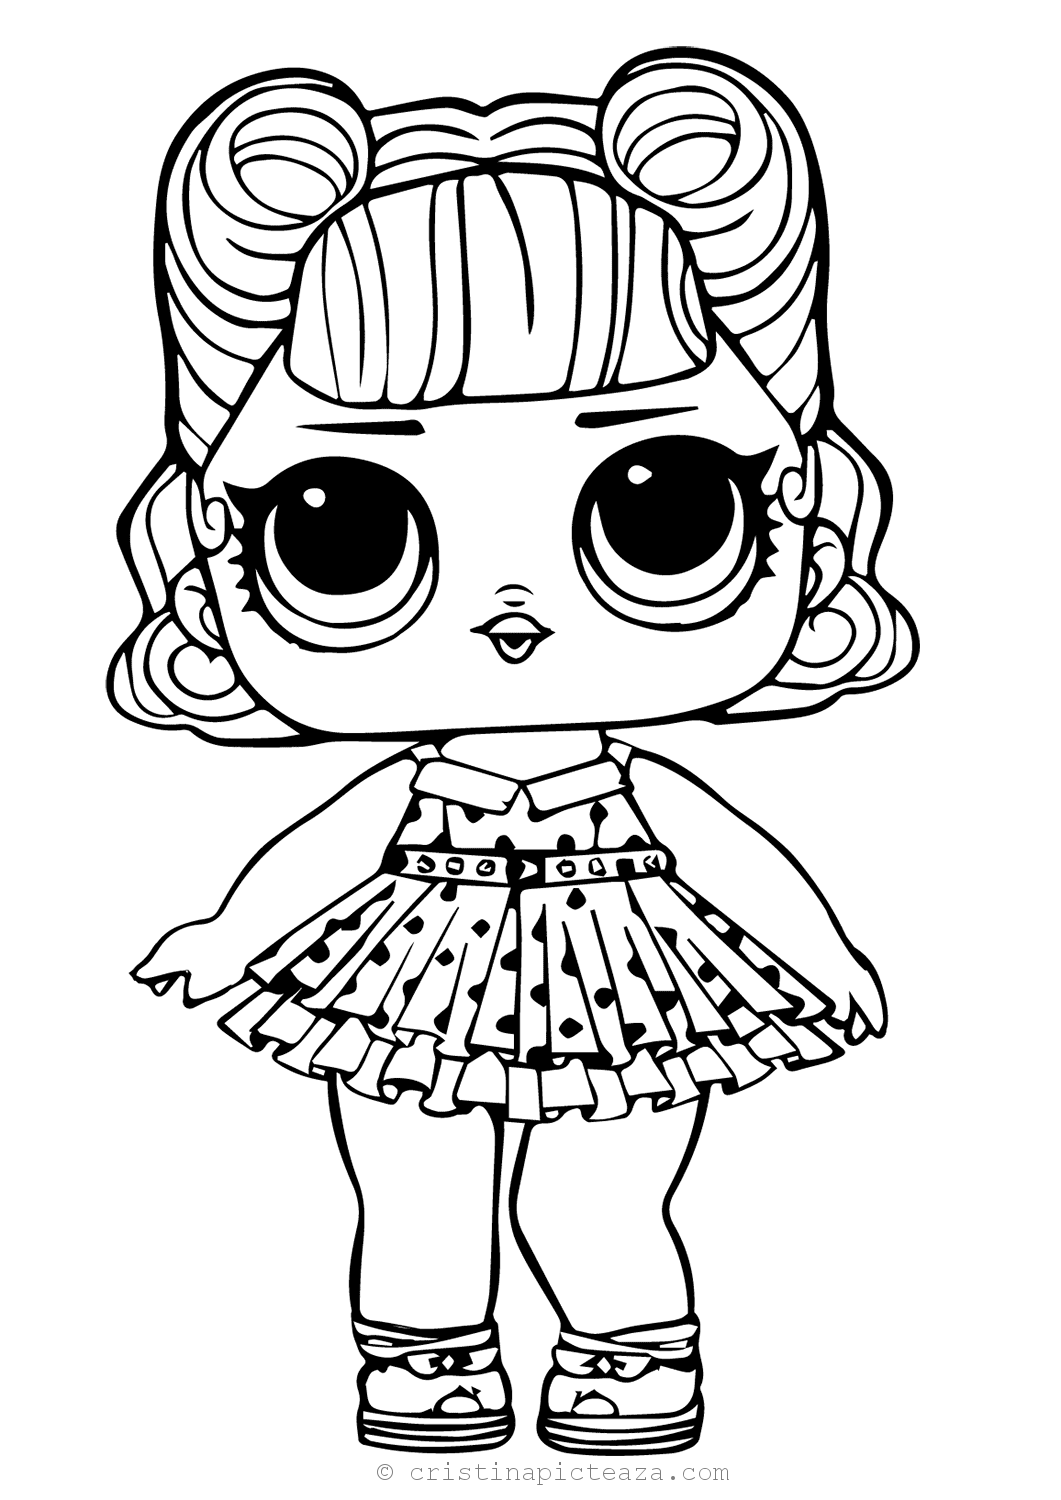 LOL Coloring Pages FREE Printable 136